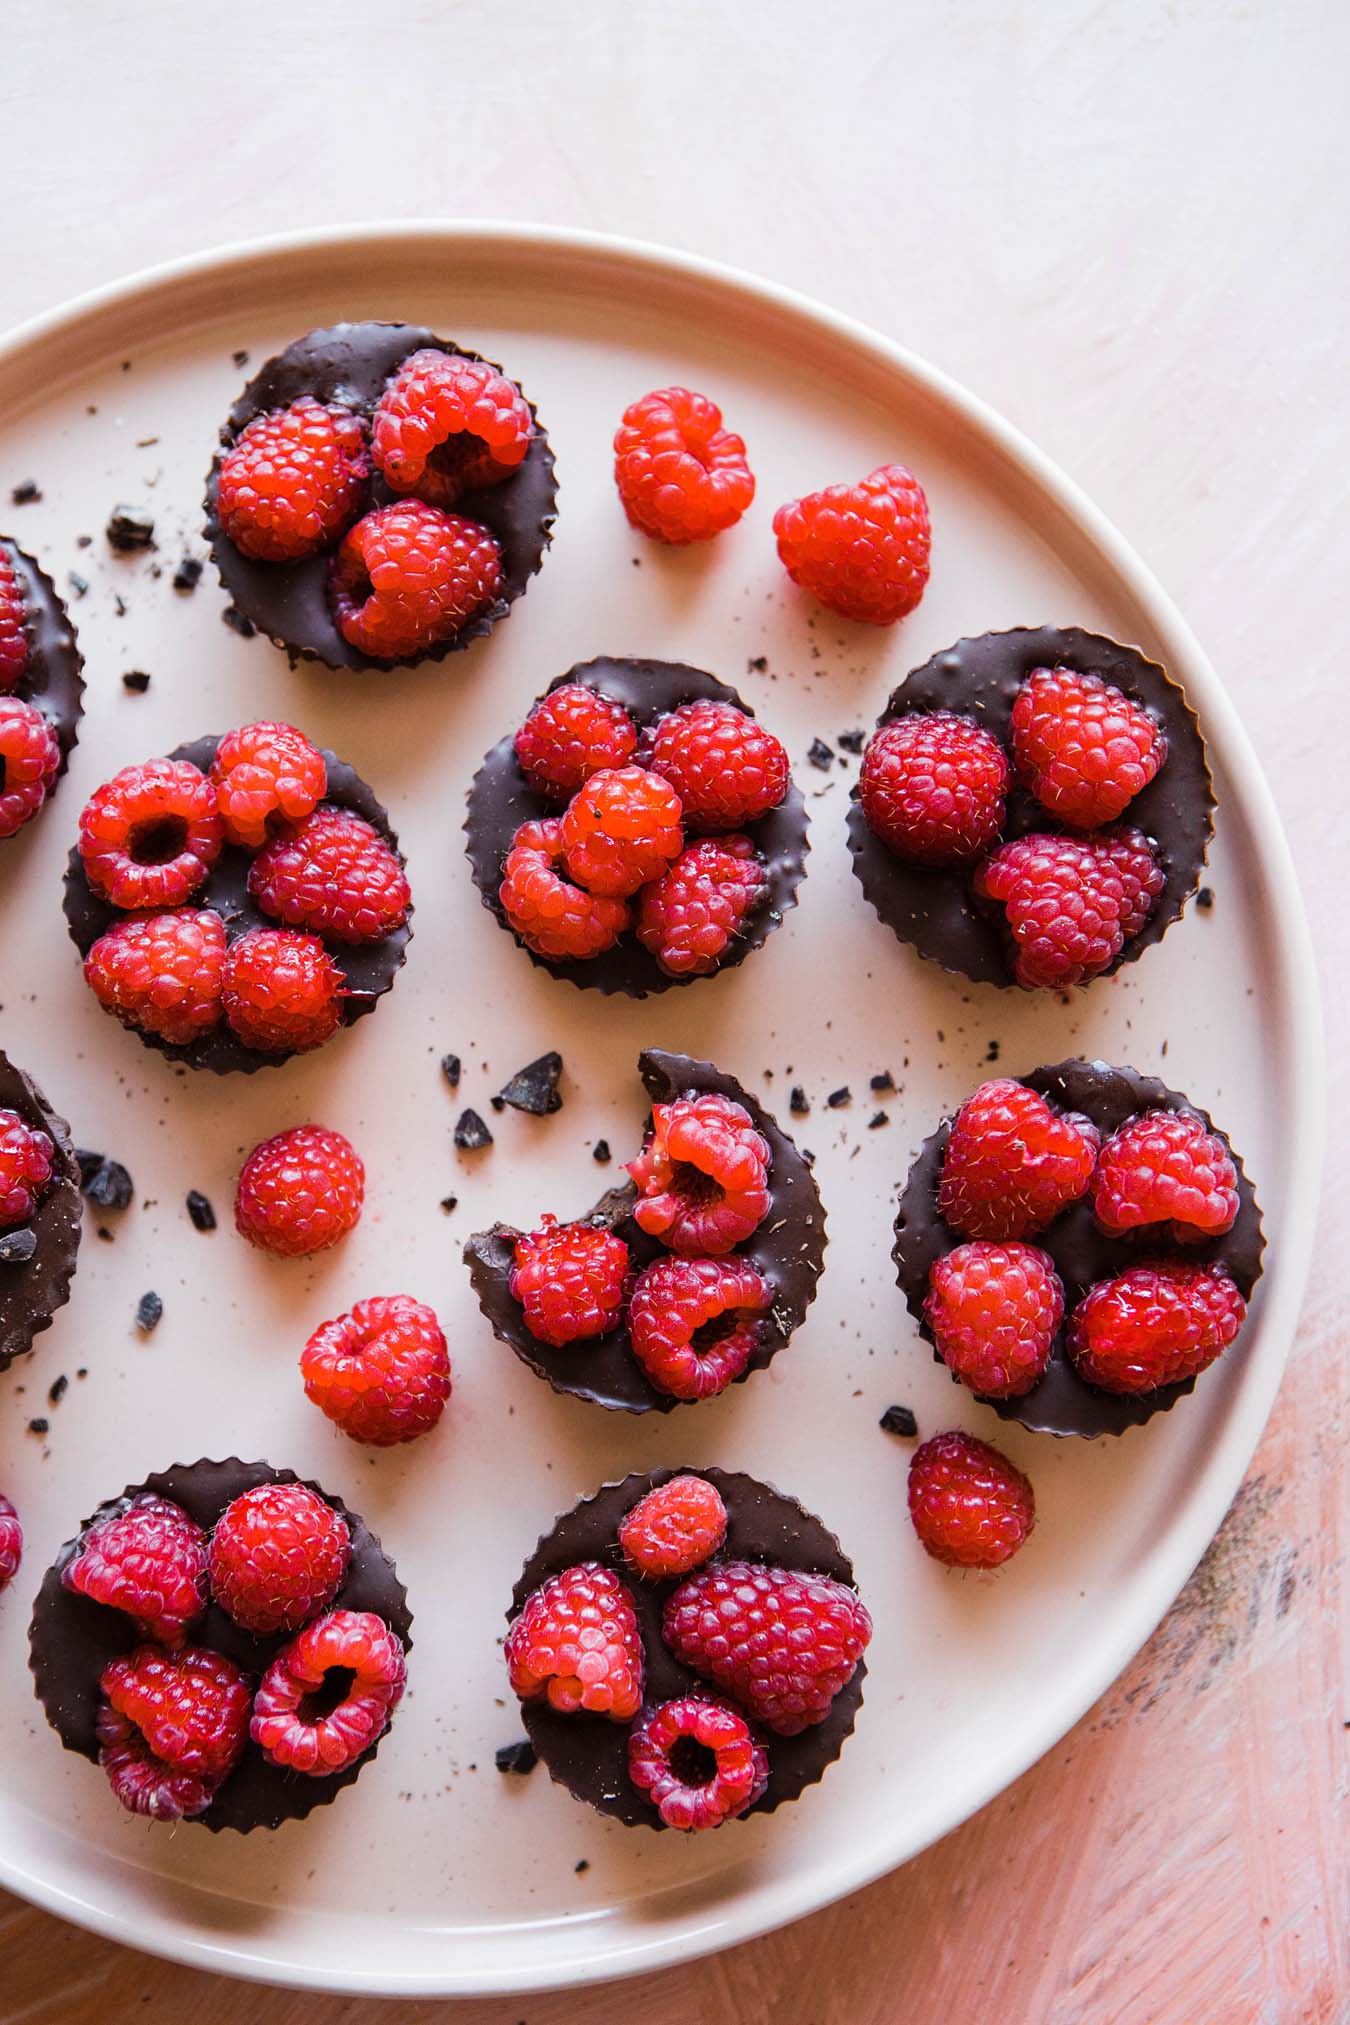 chocolate cakes with raspberries lying on a white plate - one cake is bitten into and some raspberries are lying next to it